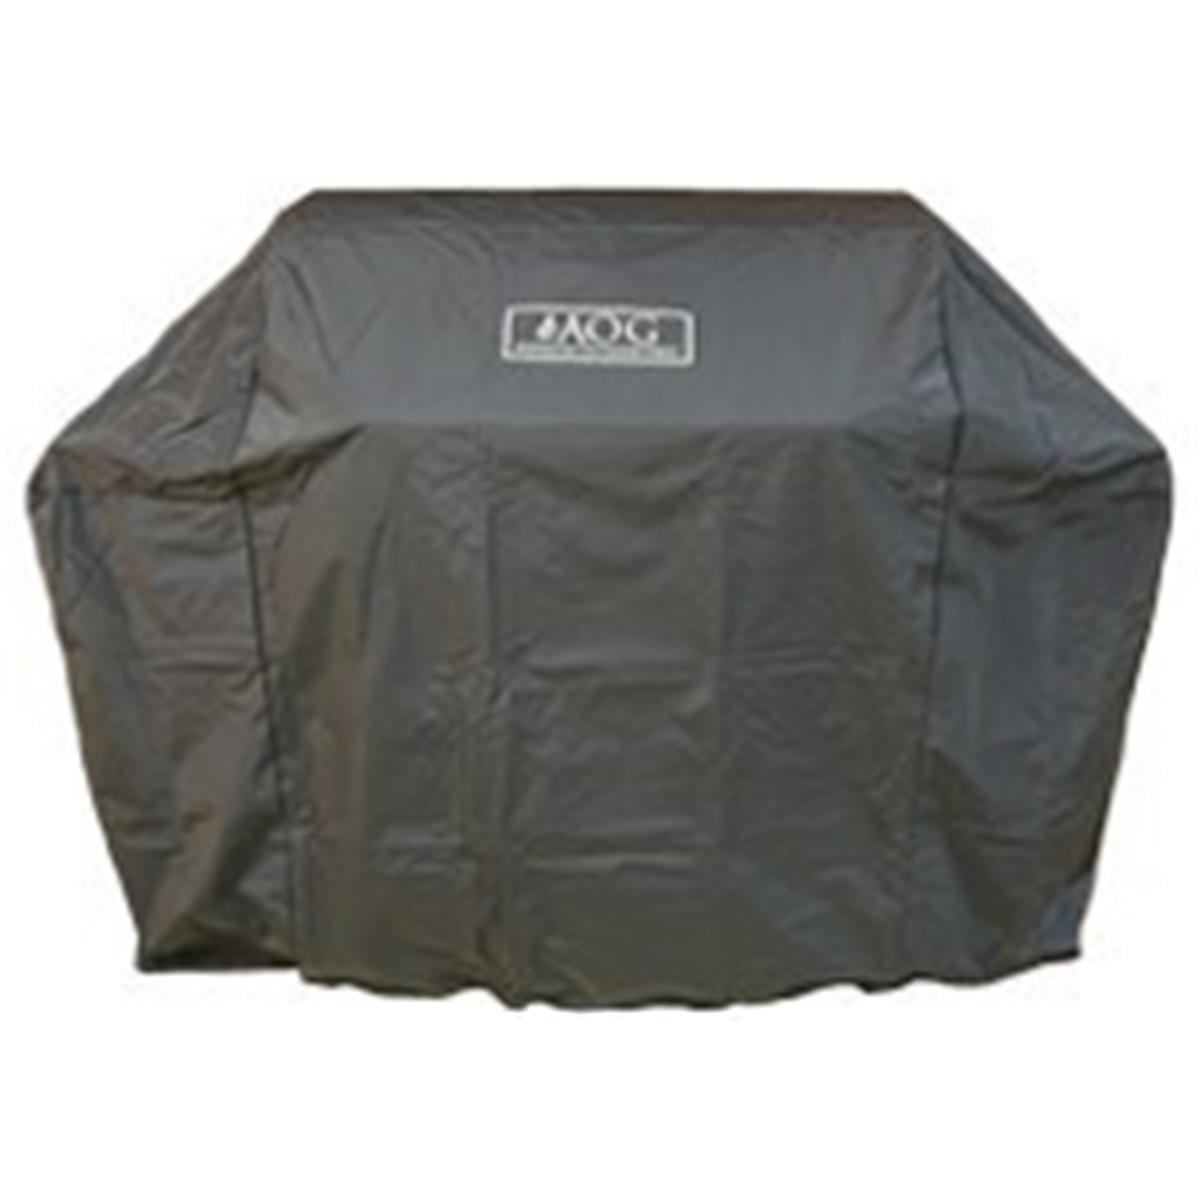 Cc36-d 36 In. Vinyl Portable Grill Cover